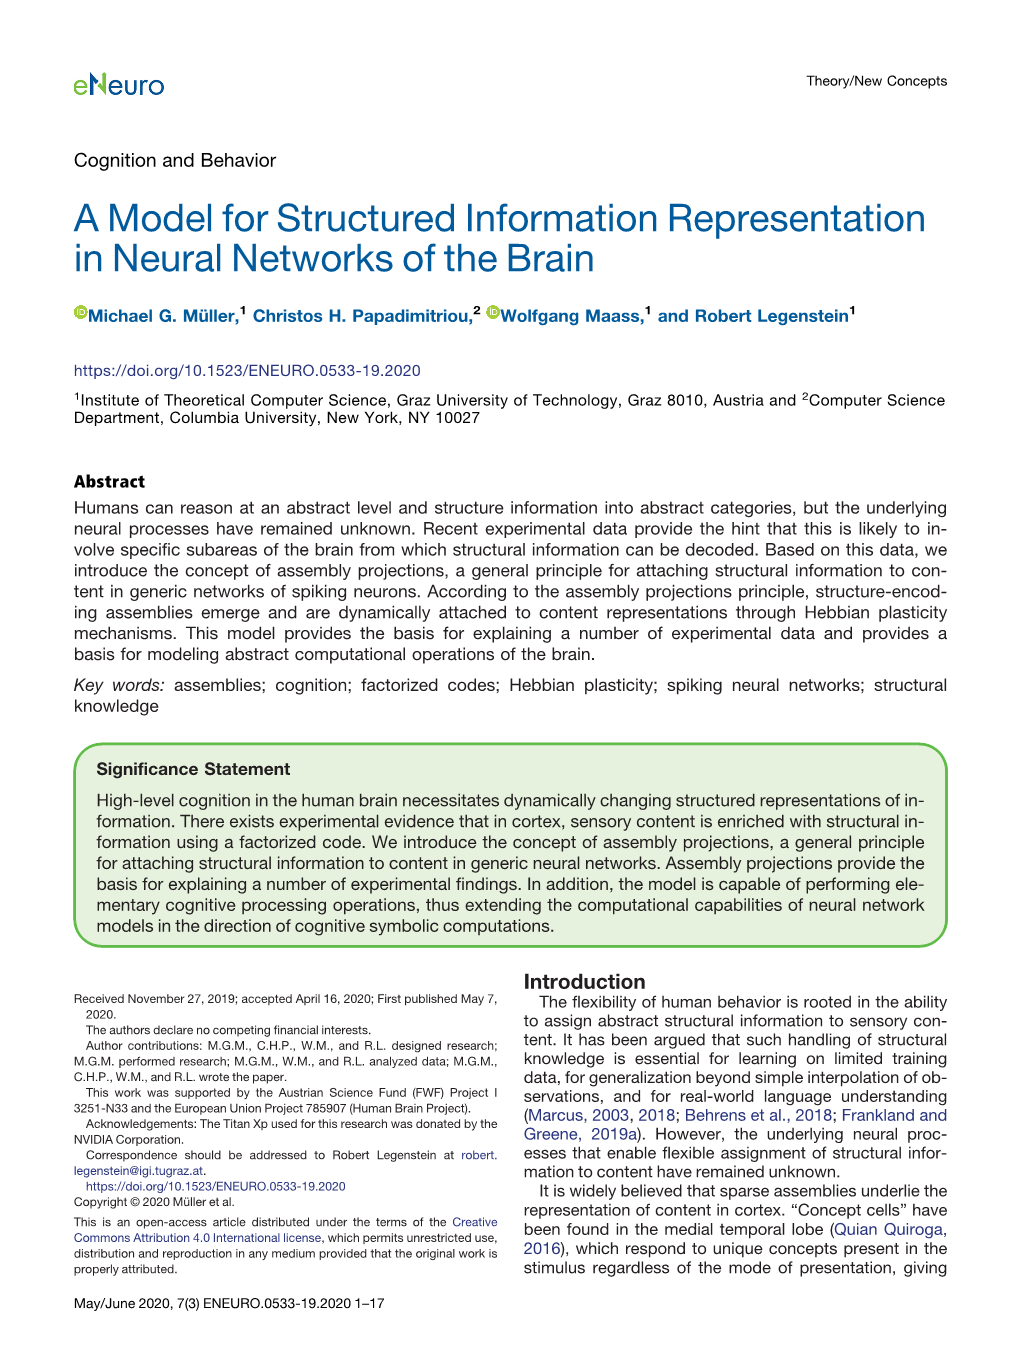 A Model for Structured Information Representation in Neural Networks of the Brain